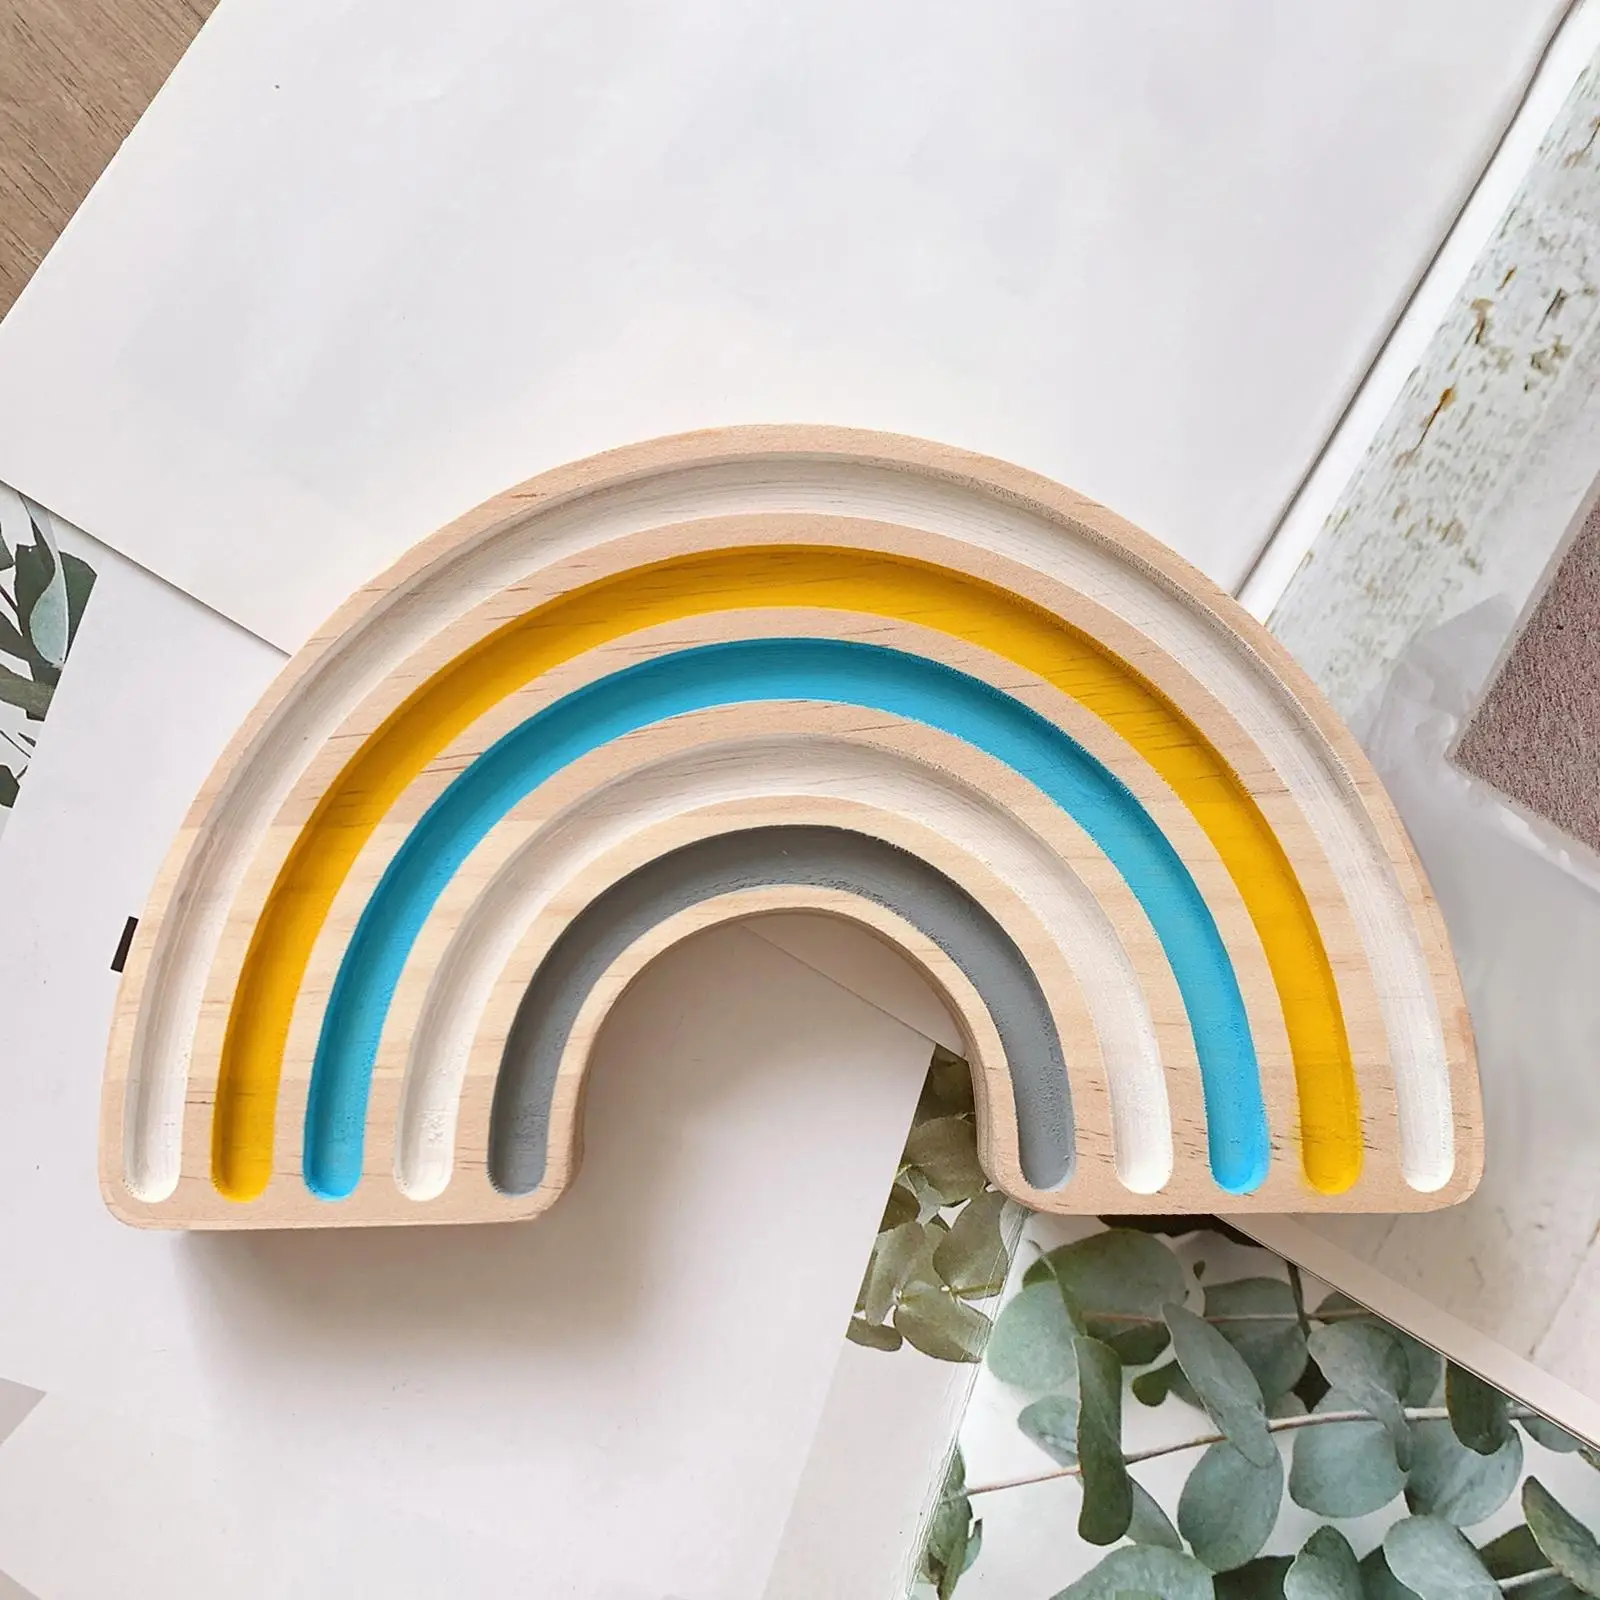 Handmade Wooden Rainbow Board Ornament Block Stacking Toy Creative Craft Decorative for Cafe Bedroom Decoration Playroom Desk